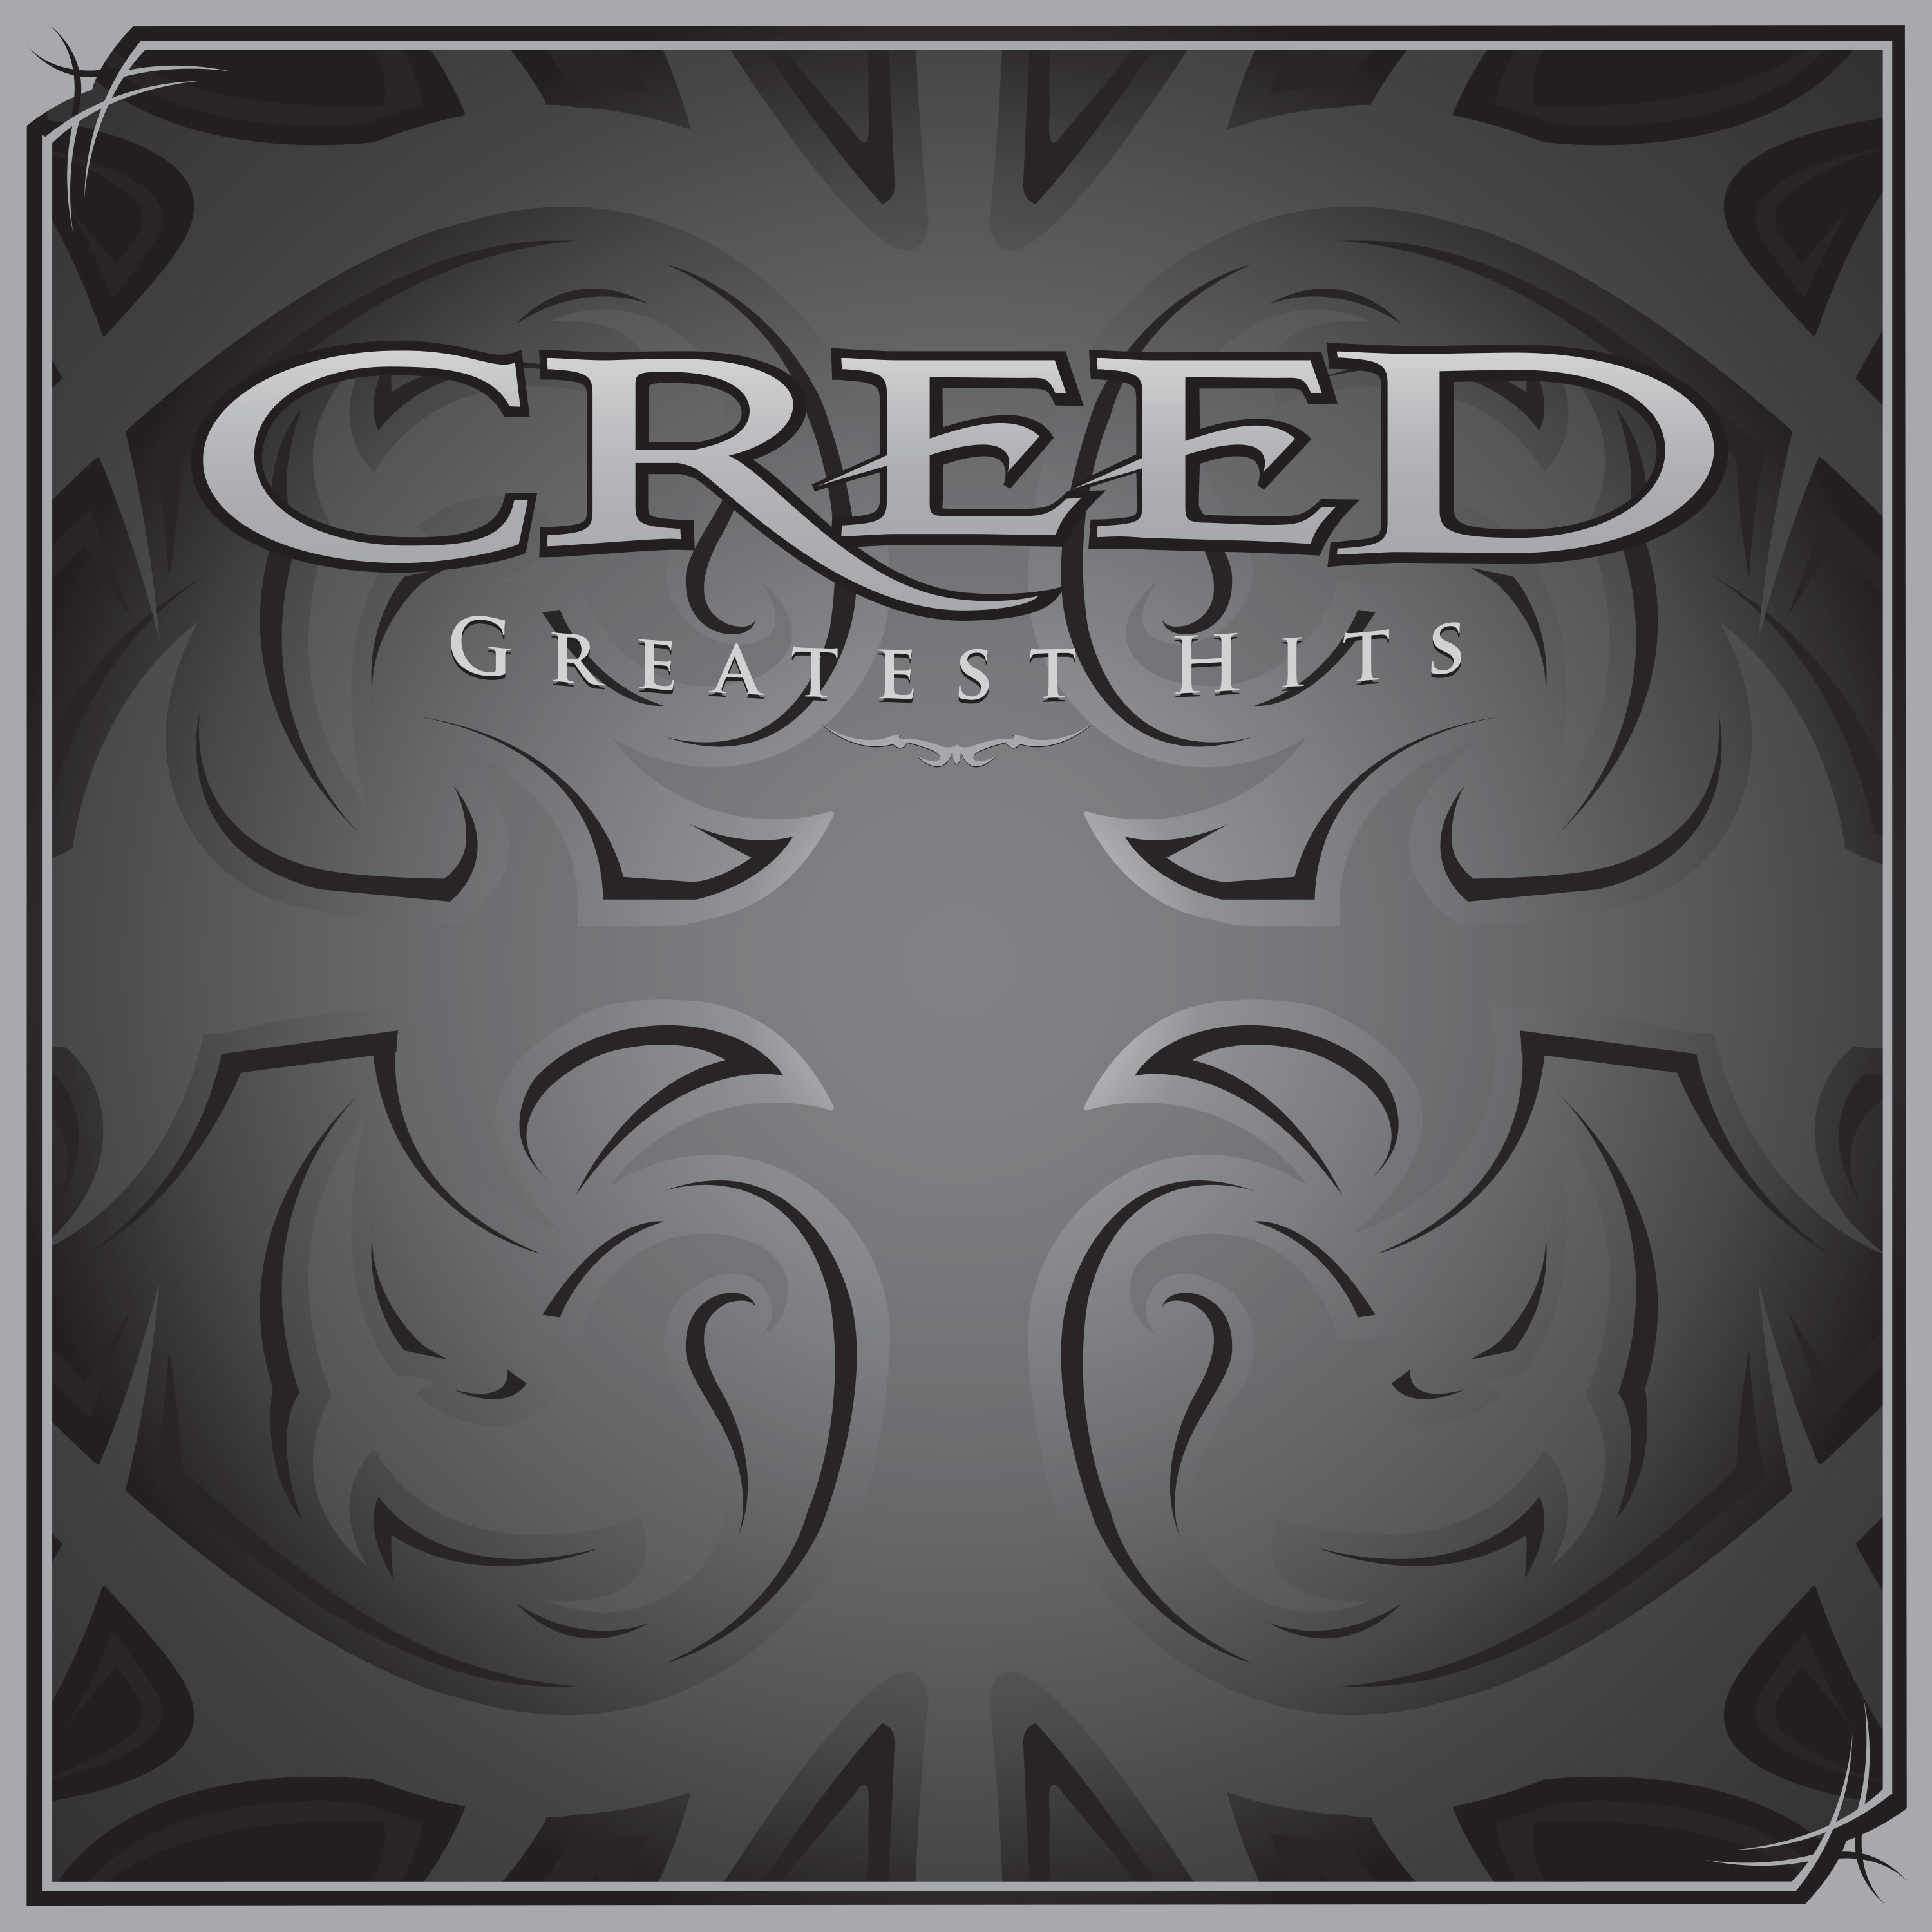 CD Shop - CREED GREATEST HITS